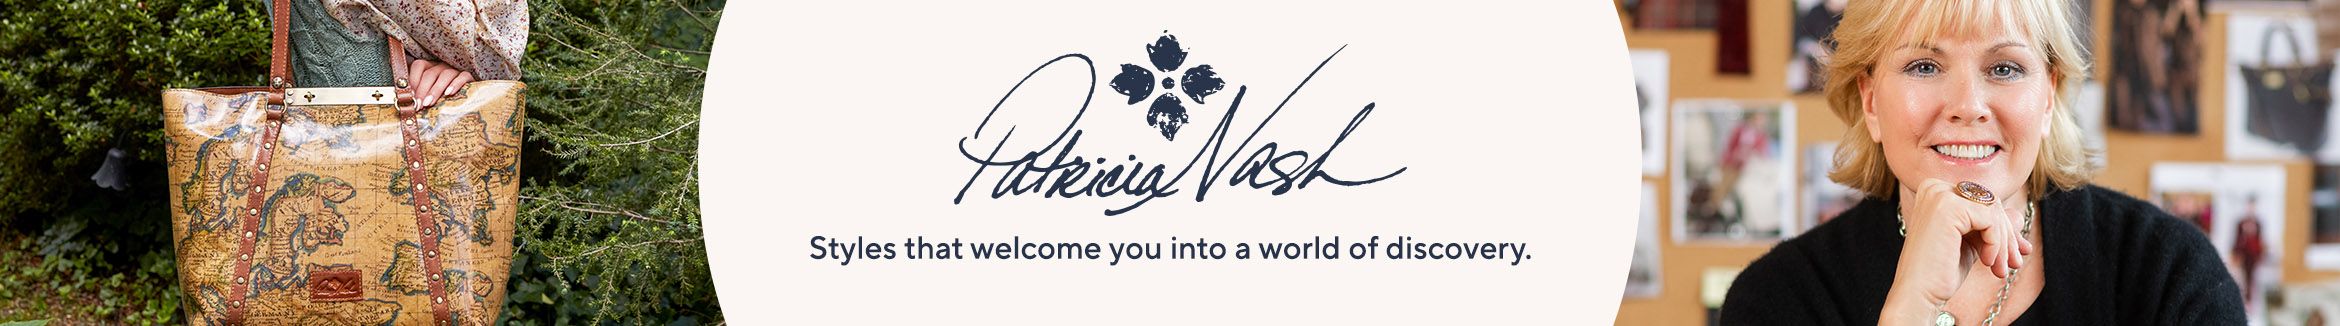 Patricia Nash — Styles that welcome you into a world of discovery 